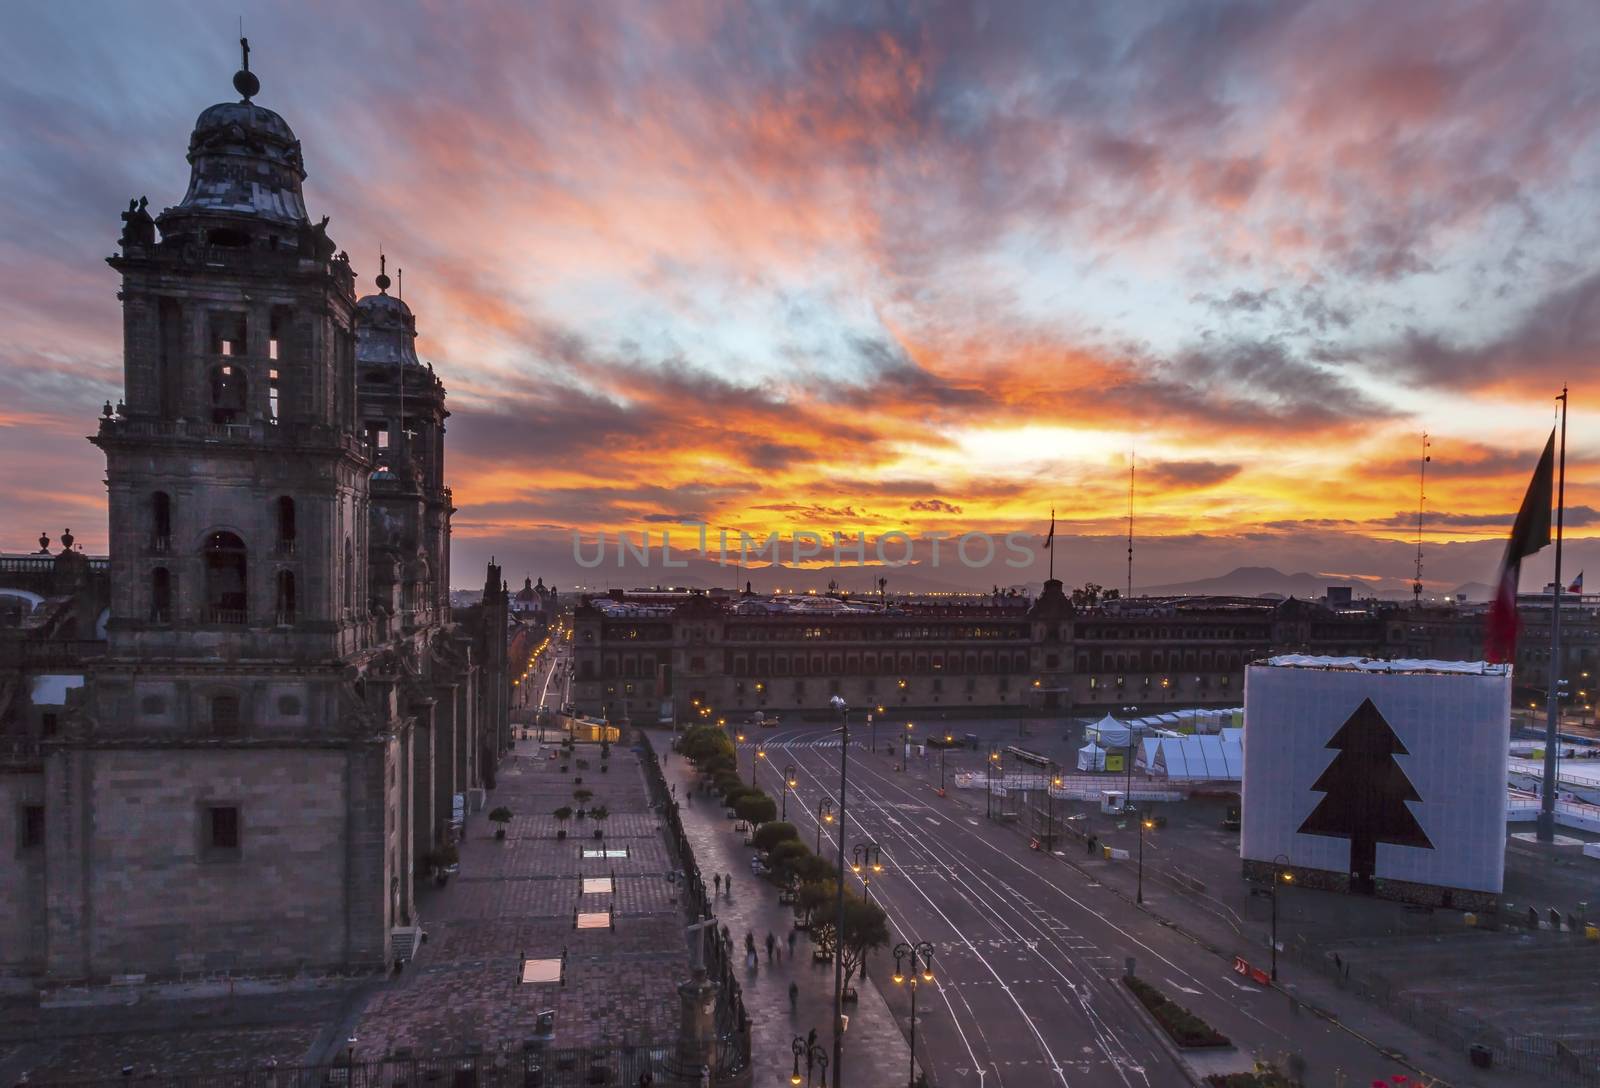 Metropolitan Cathedral and President's Palace in Zocalo, Center of Mexico City Mexico Sunrise